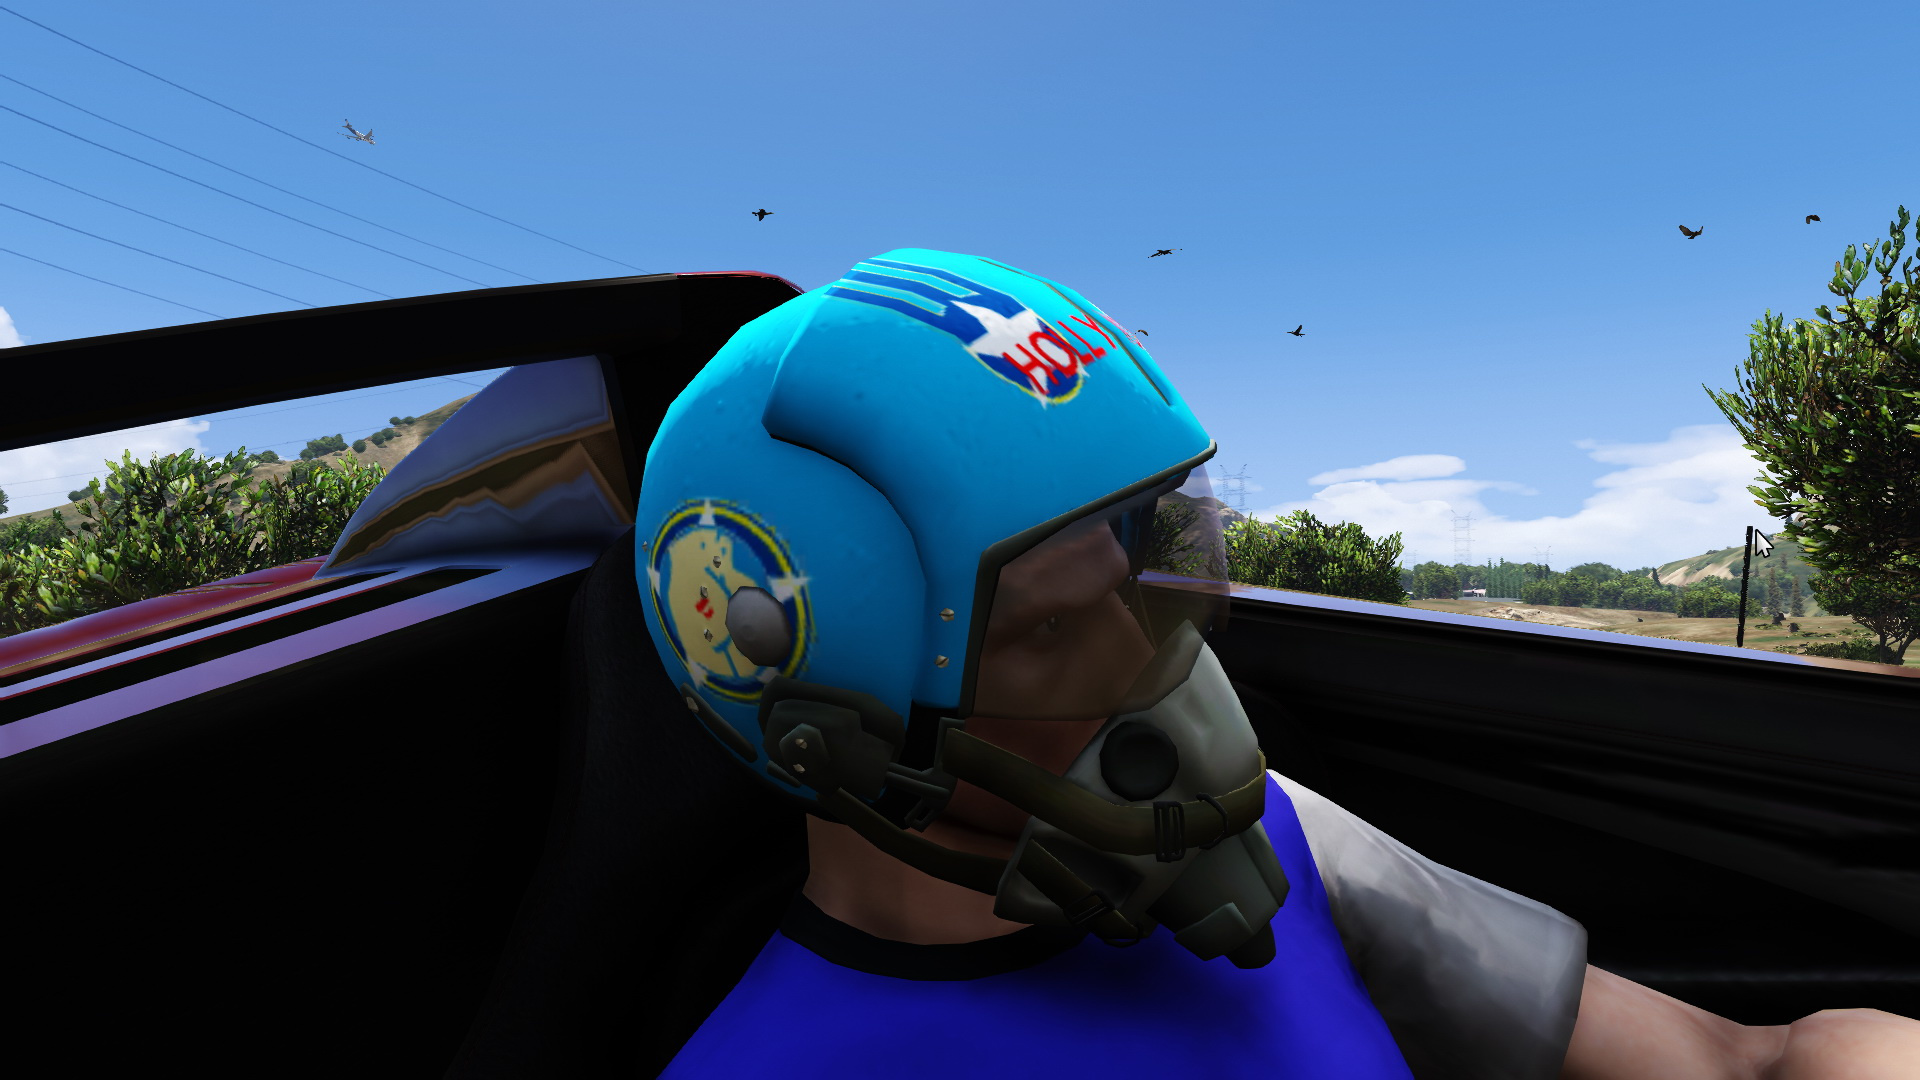 New Helmets For Franklin (Gucci Helmet Included) 